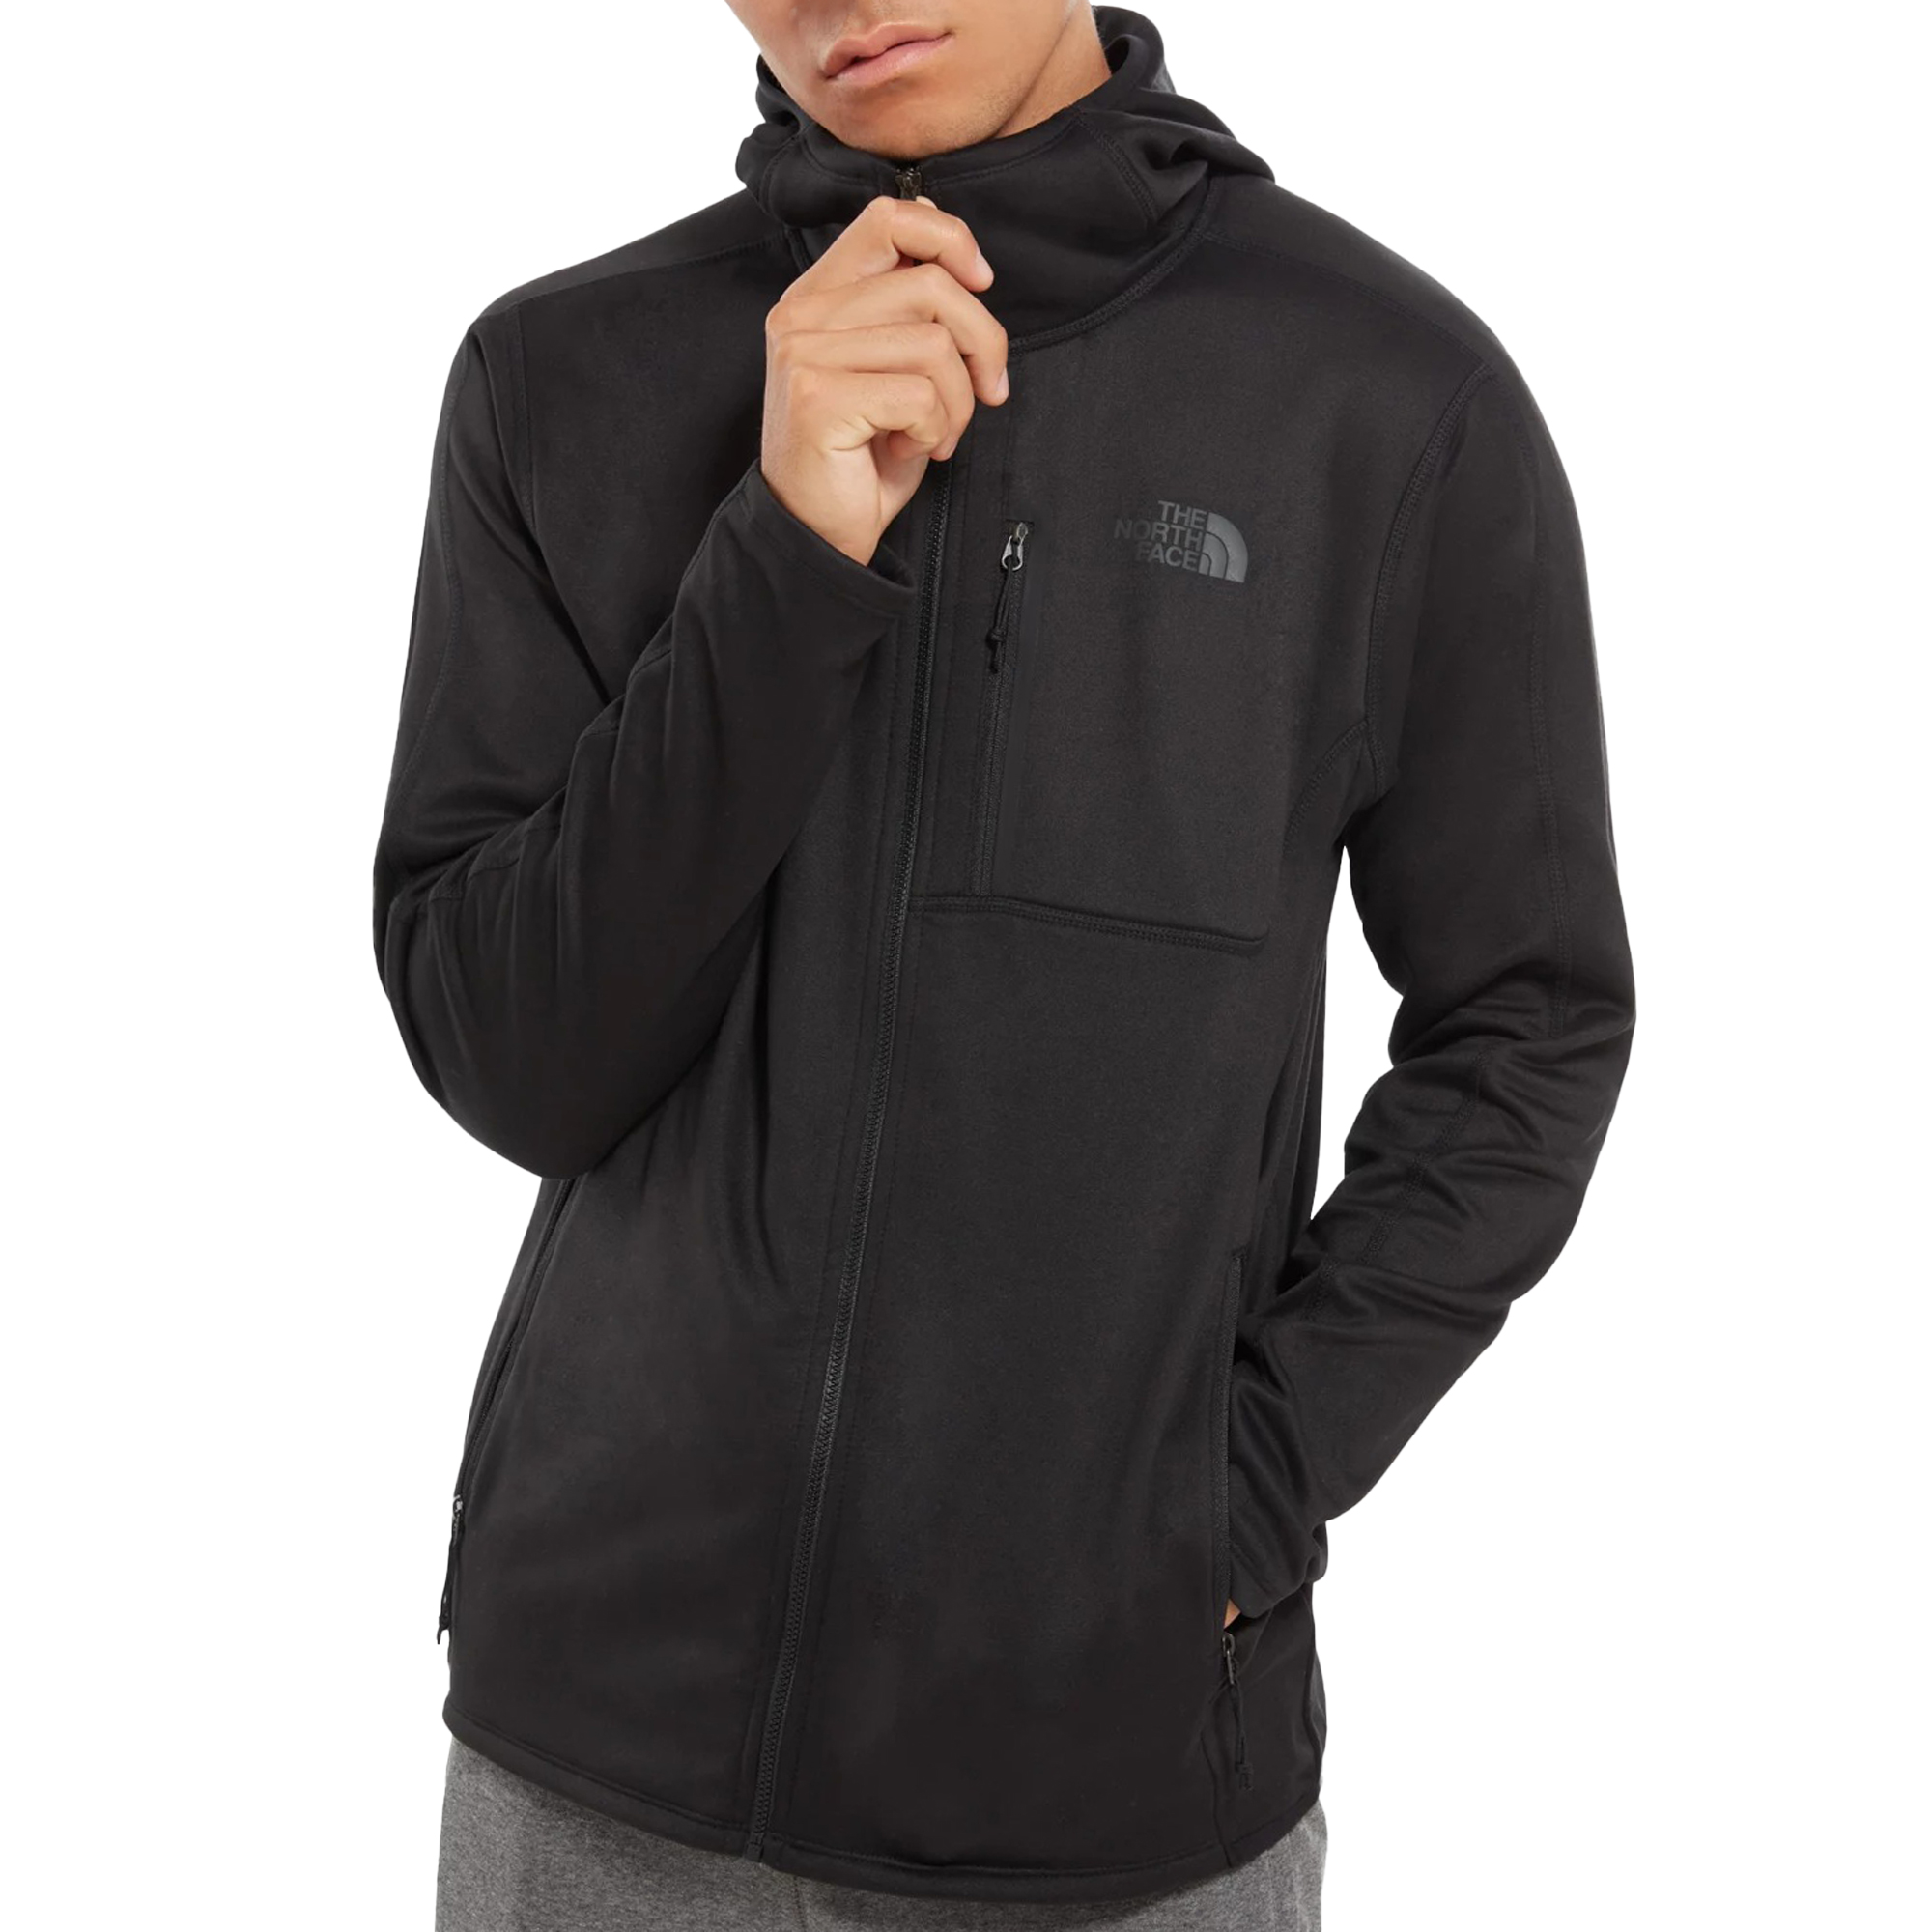 Veste polaire The North Face Canyonlands Hooded Homme